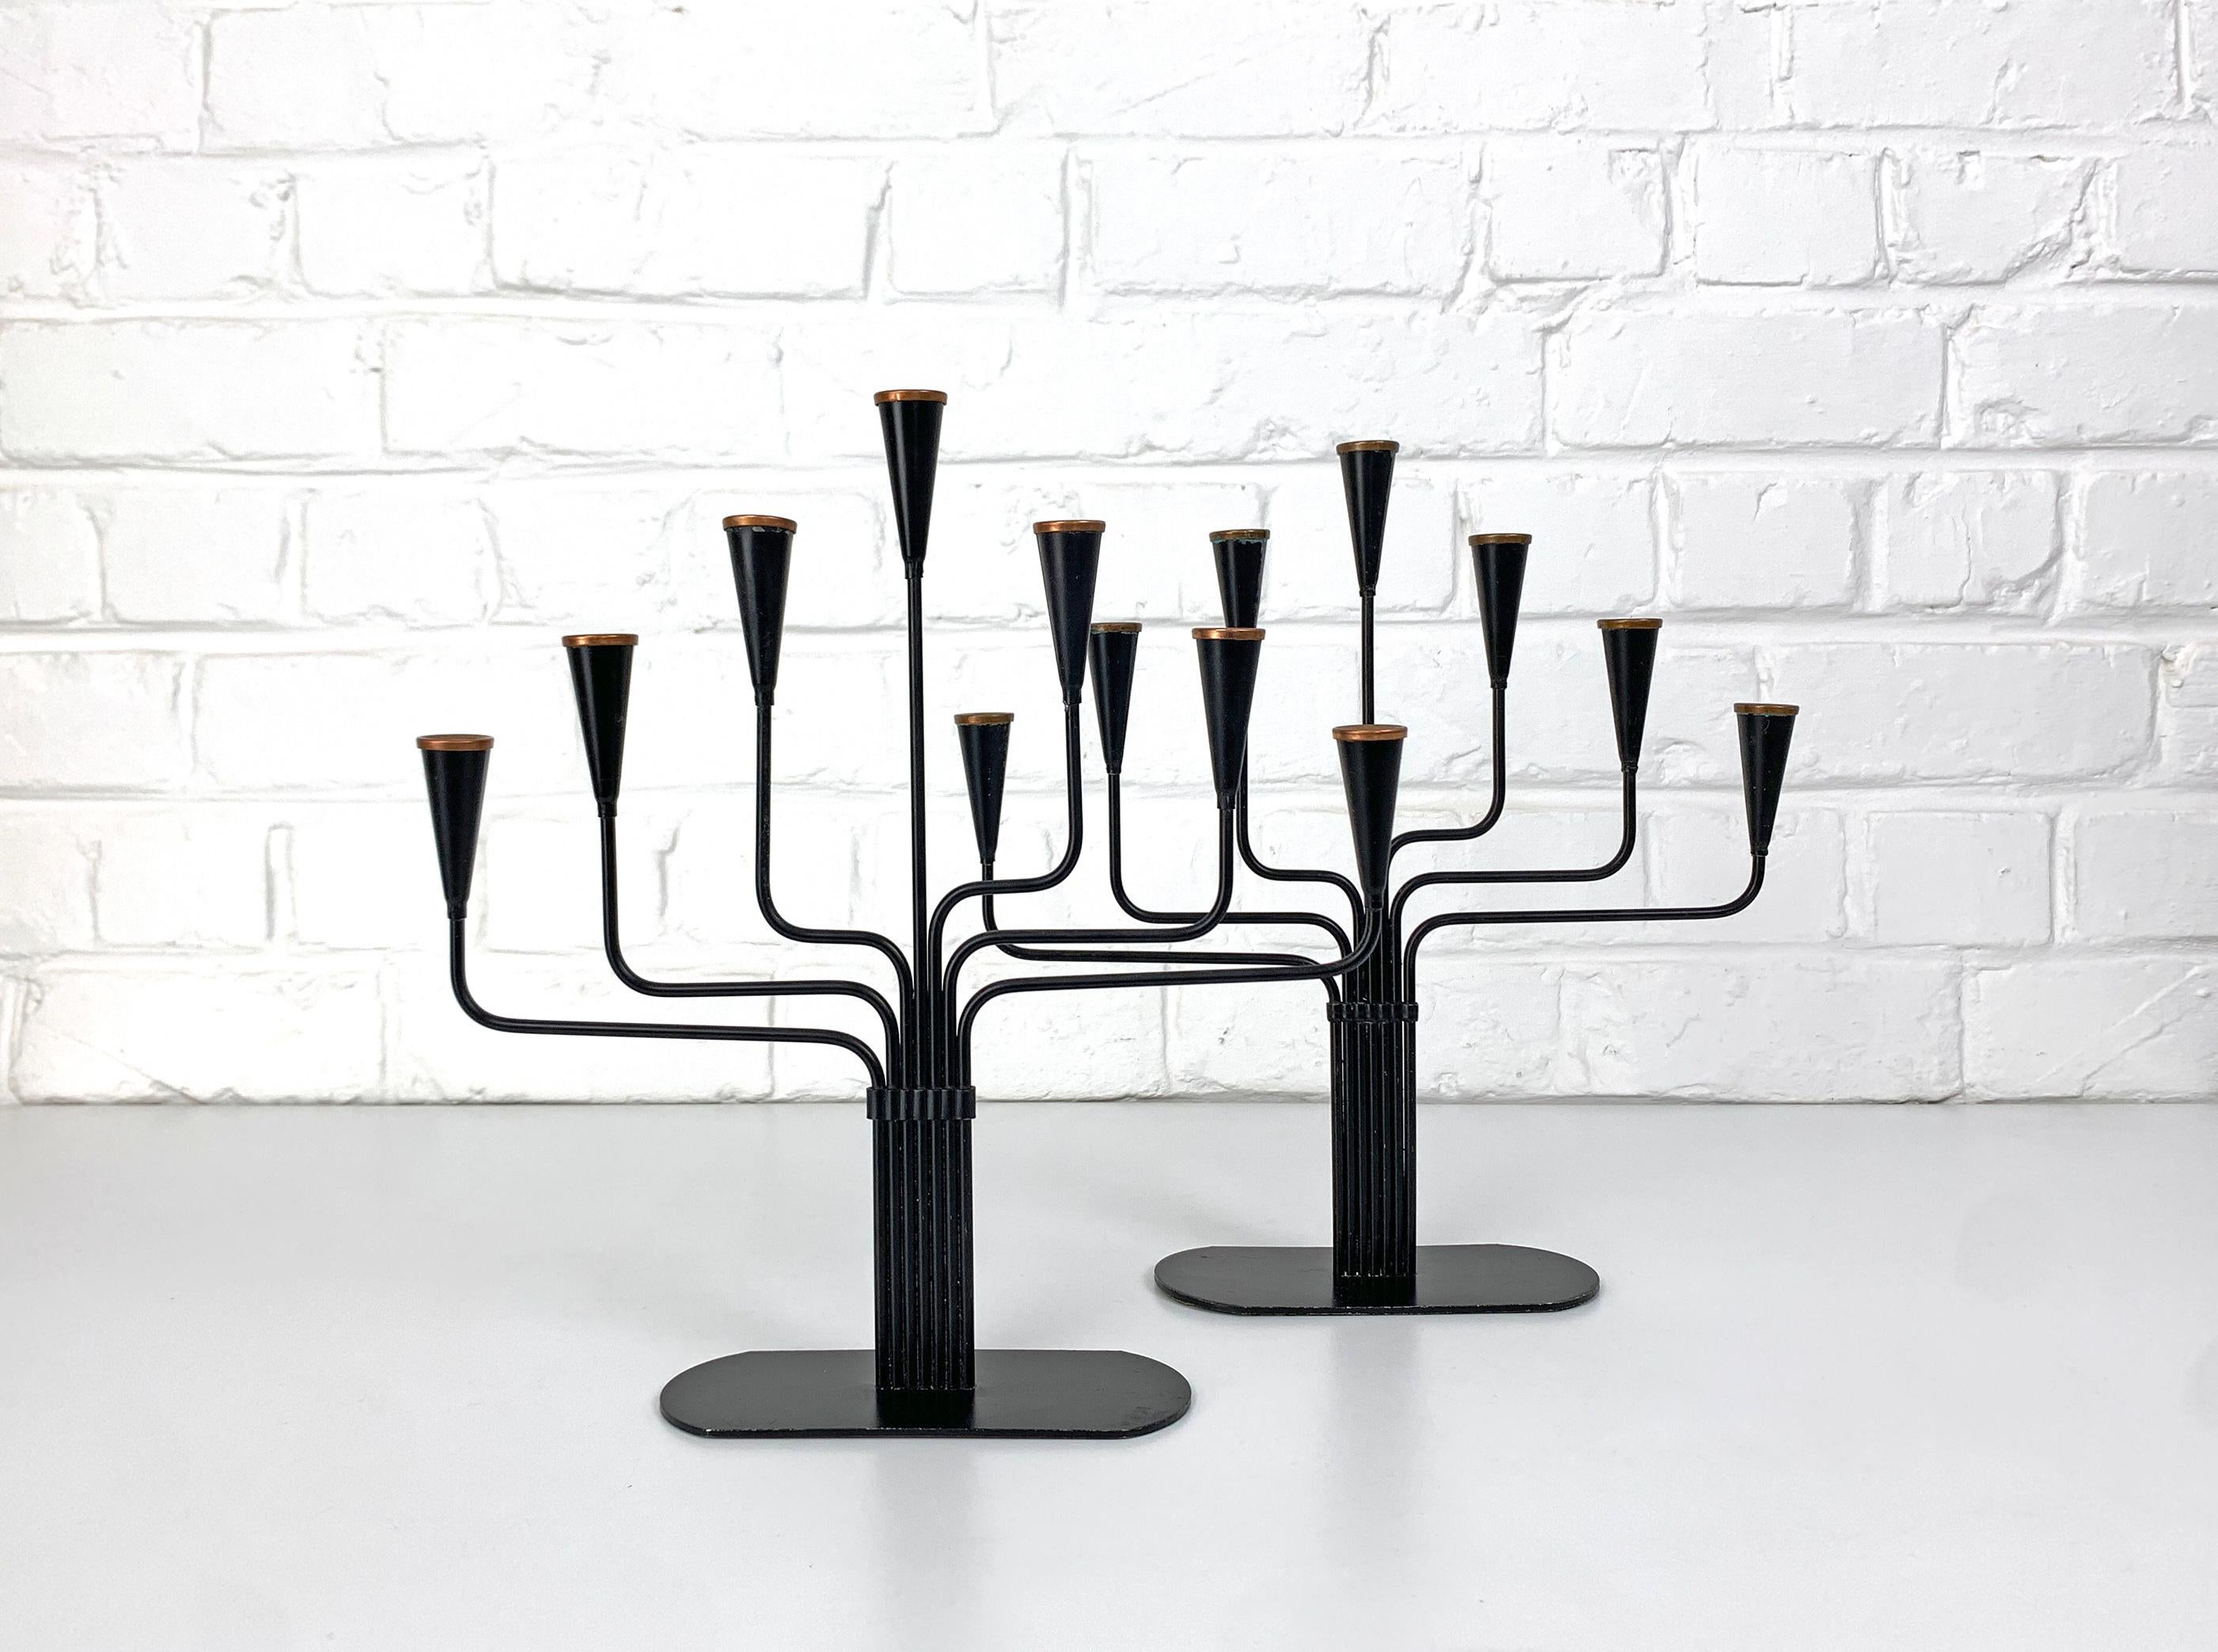 Pair of Swedish Modernist candle holders for 7 candles, designed by Gunnar Ander. Produced by Ystad-Metall, located in the town of Ystad in Sweden. 

Made of steel, painted black with copper rings at the top.

Gunnar Ander is a Swedish artist born